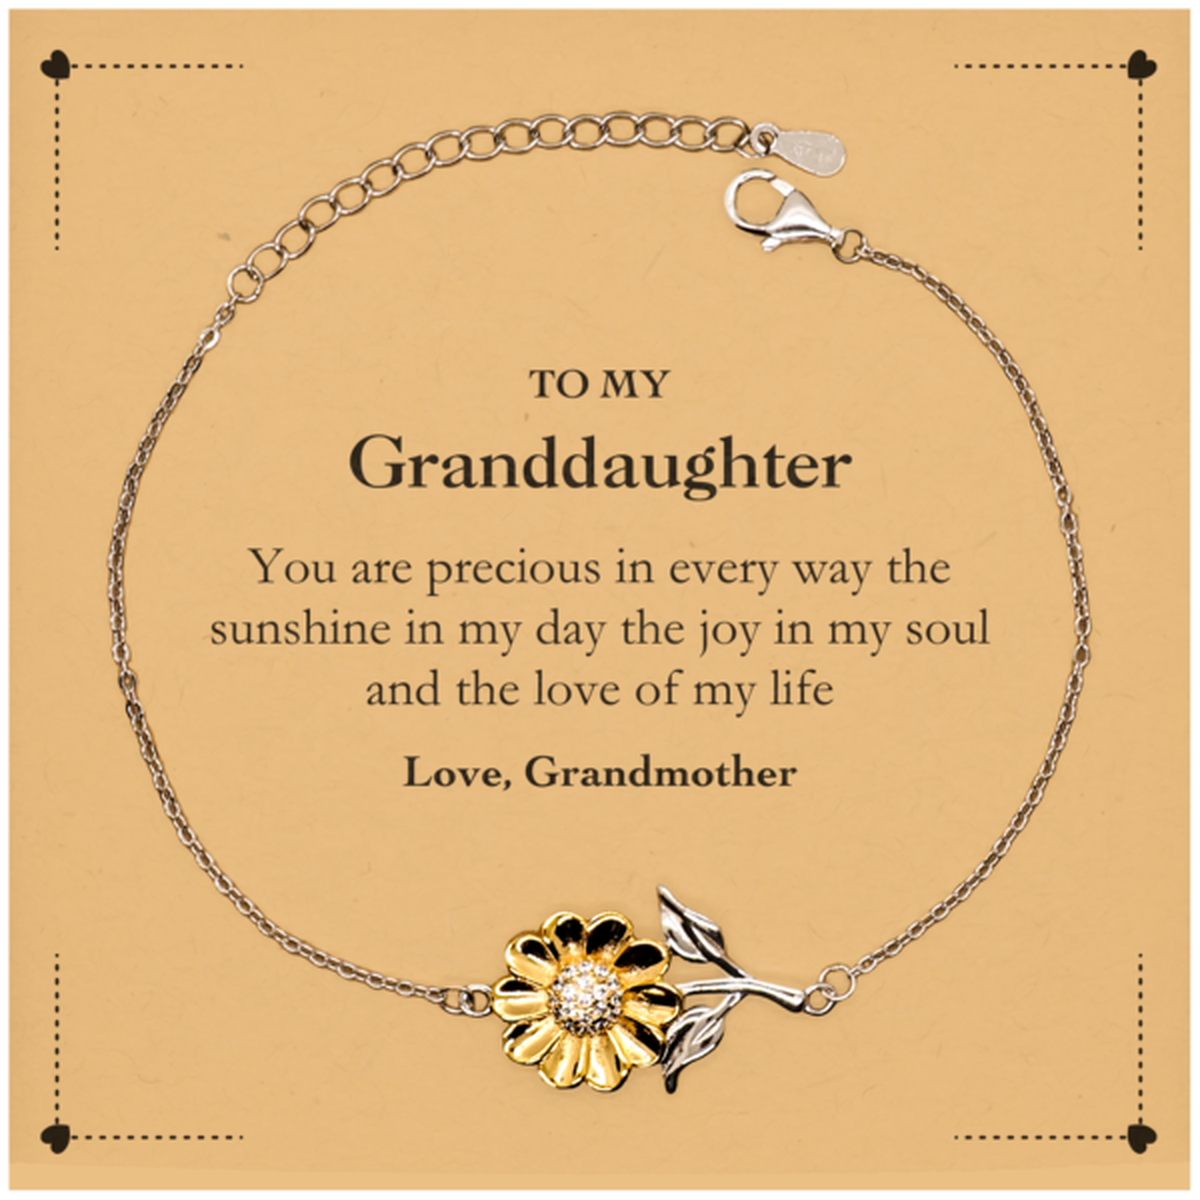 Graduation Gifts for Granddaughter Sunflower Bracelet Present from Grandmother, Christmas Granddaughter Birthday Gifts Granddaughter You are precious in every way the sunshine in my day. Love, Grandmother